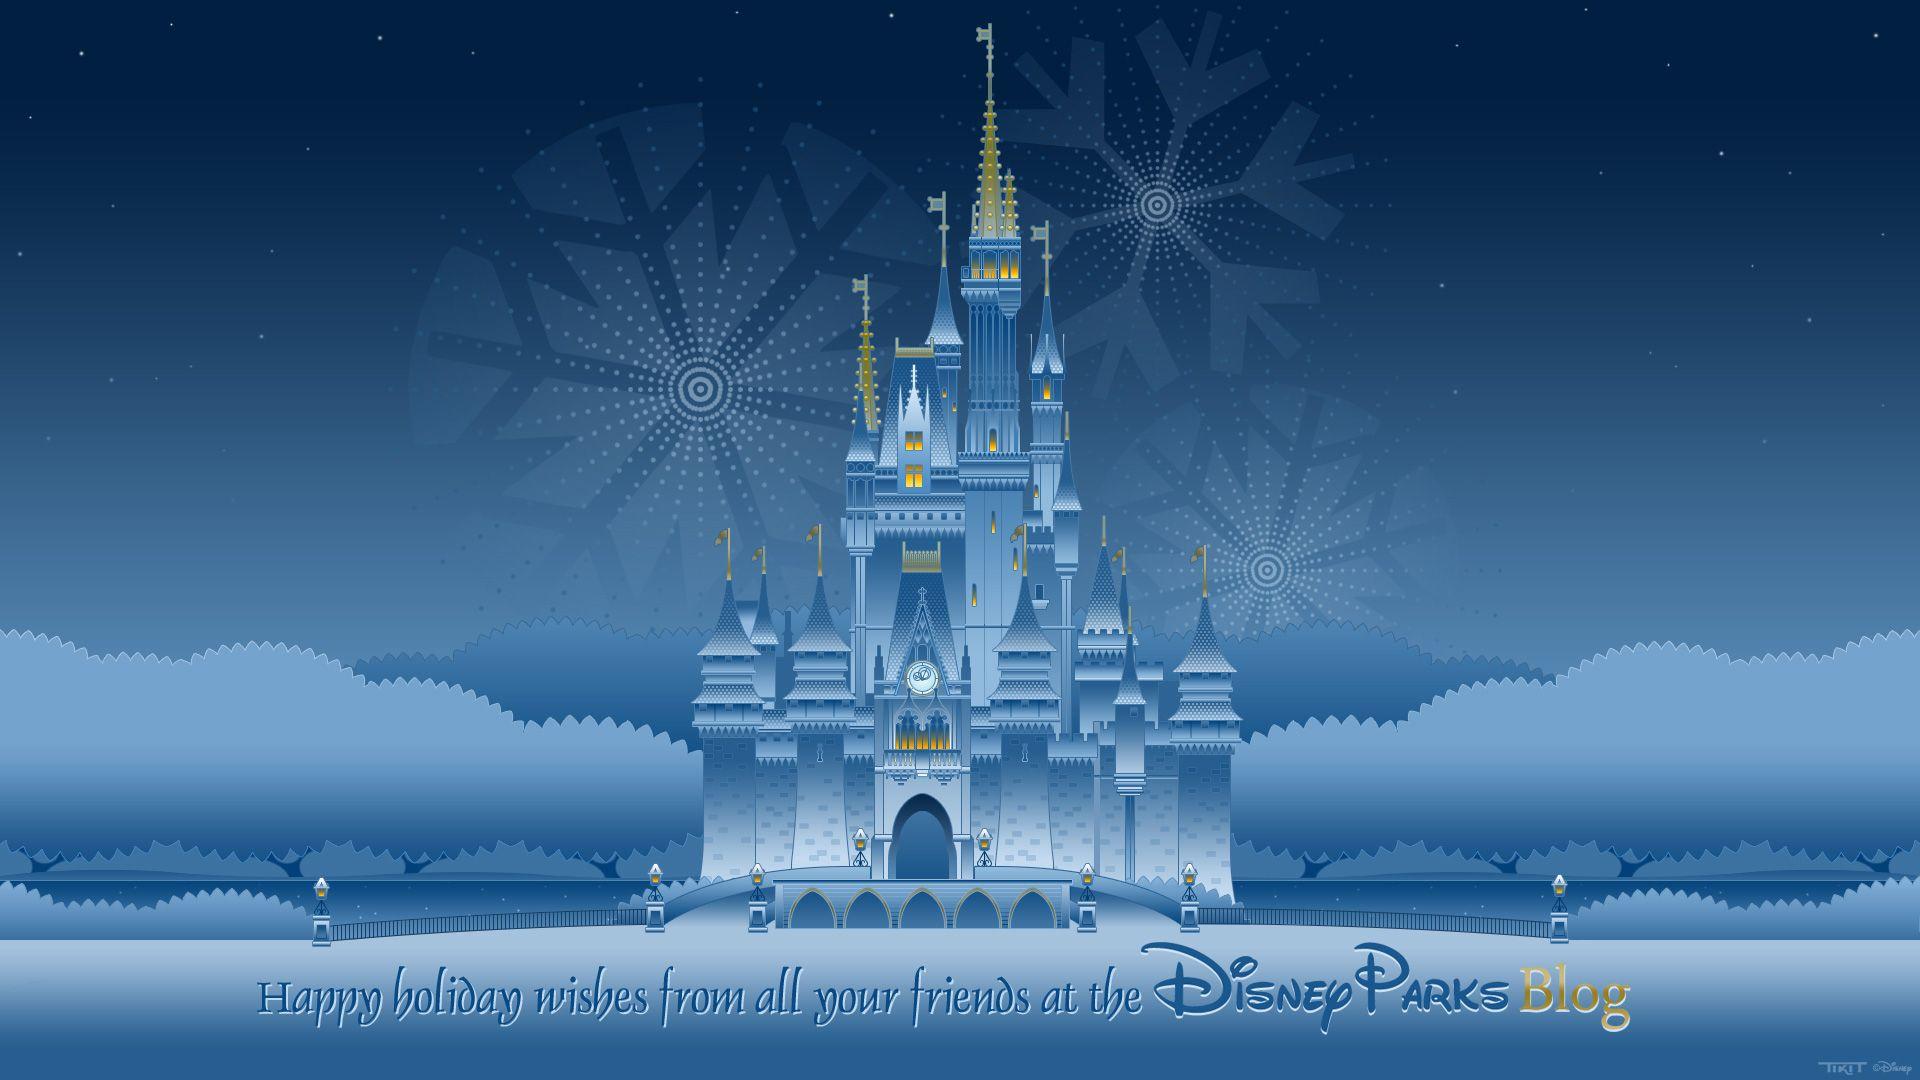 Get Excited For The Season With 18 Holiday Disney Parks Blog